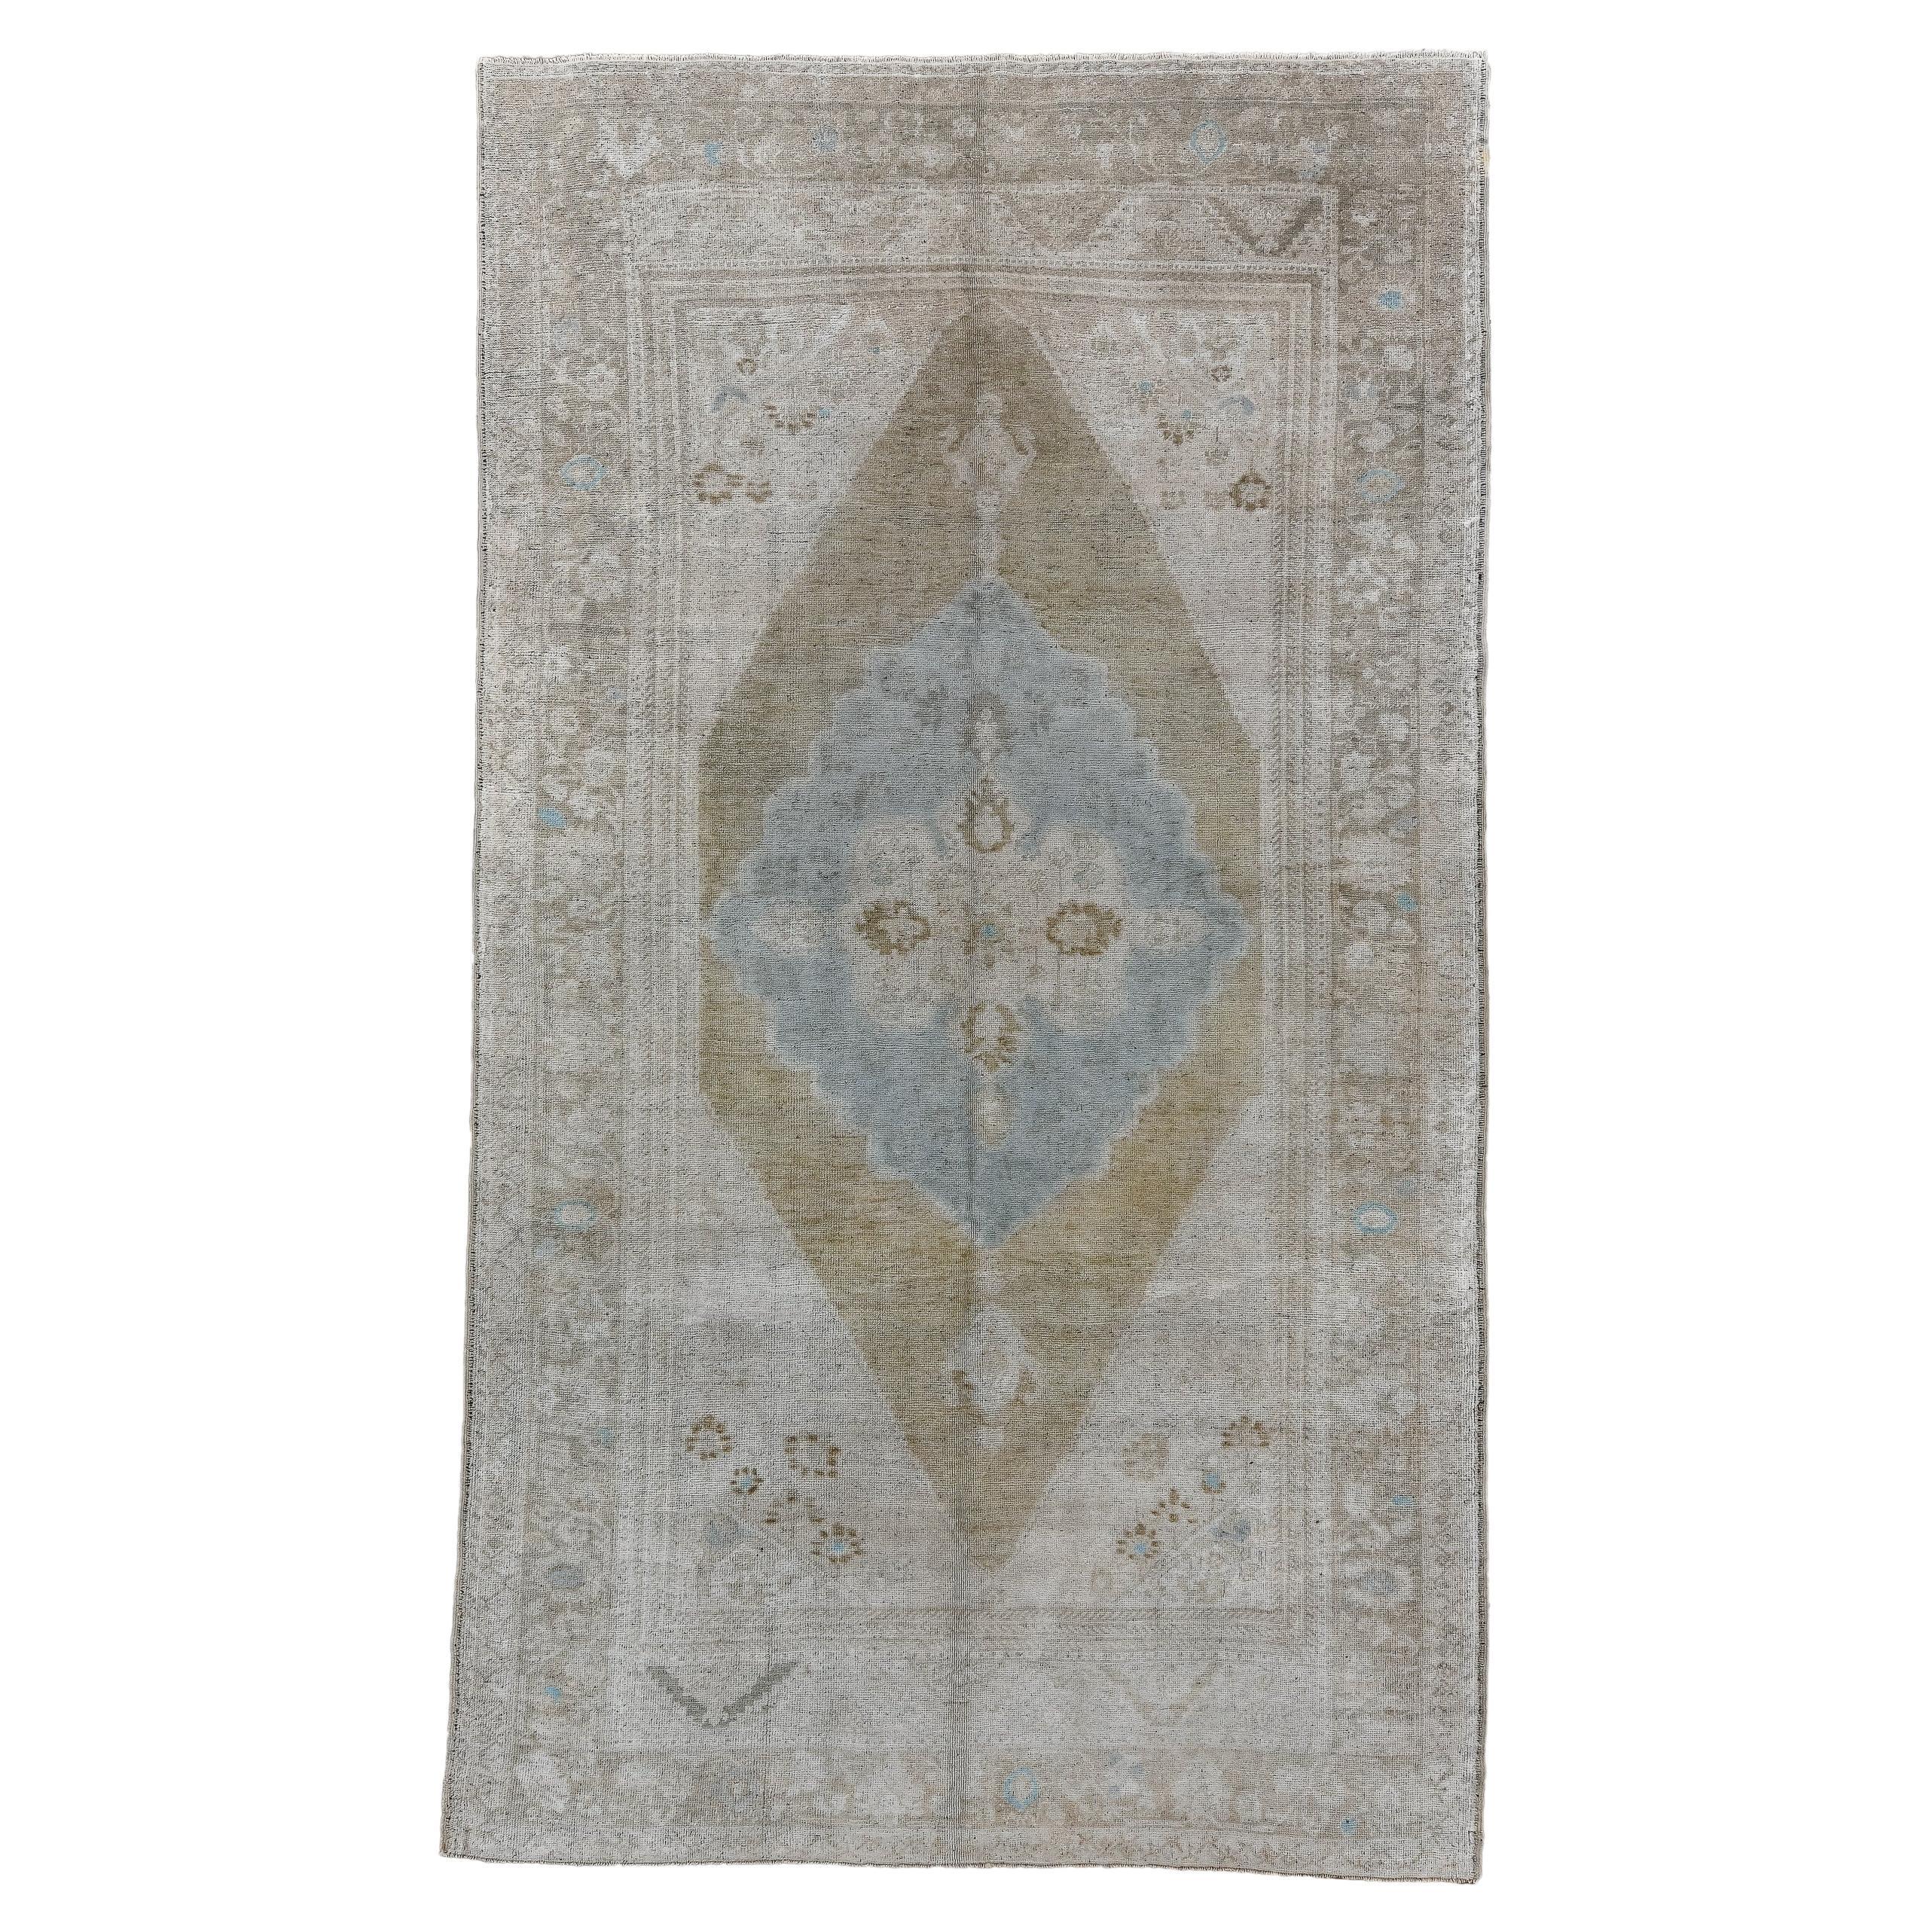 Antique Oushak Rug with Teal Medallion on a Plain Field 